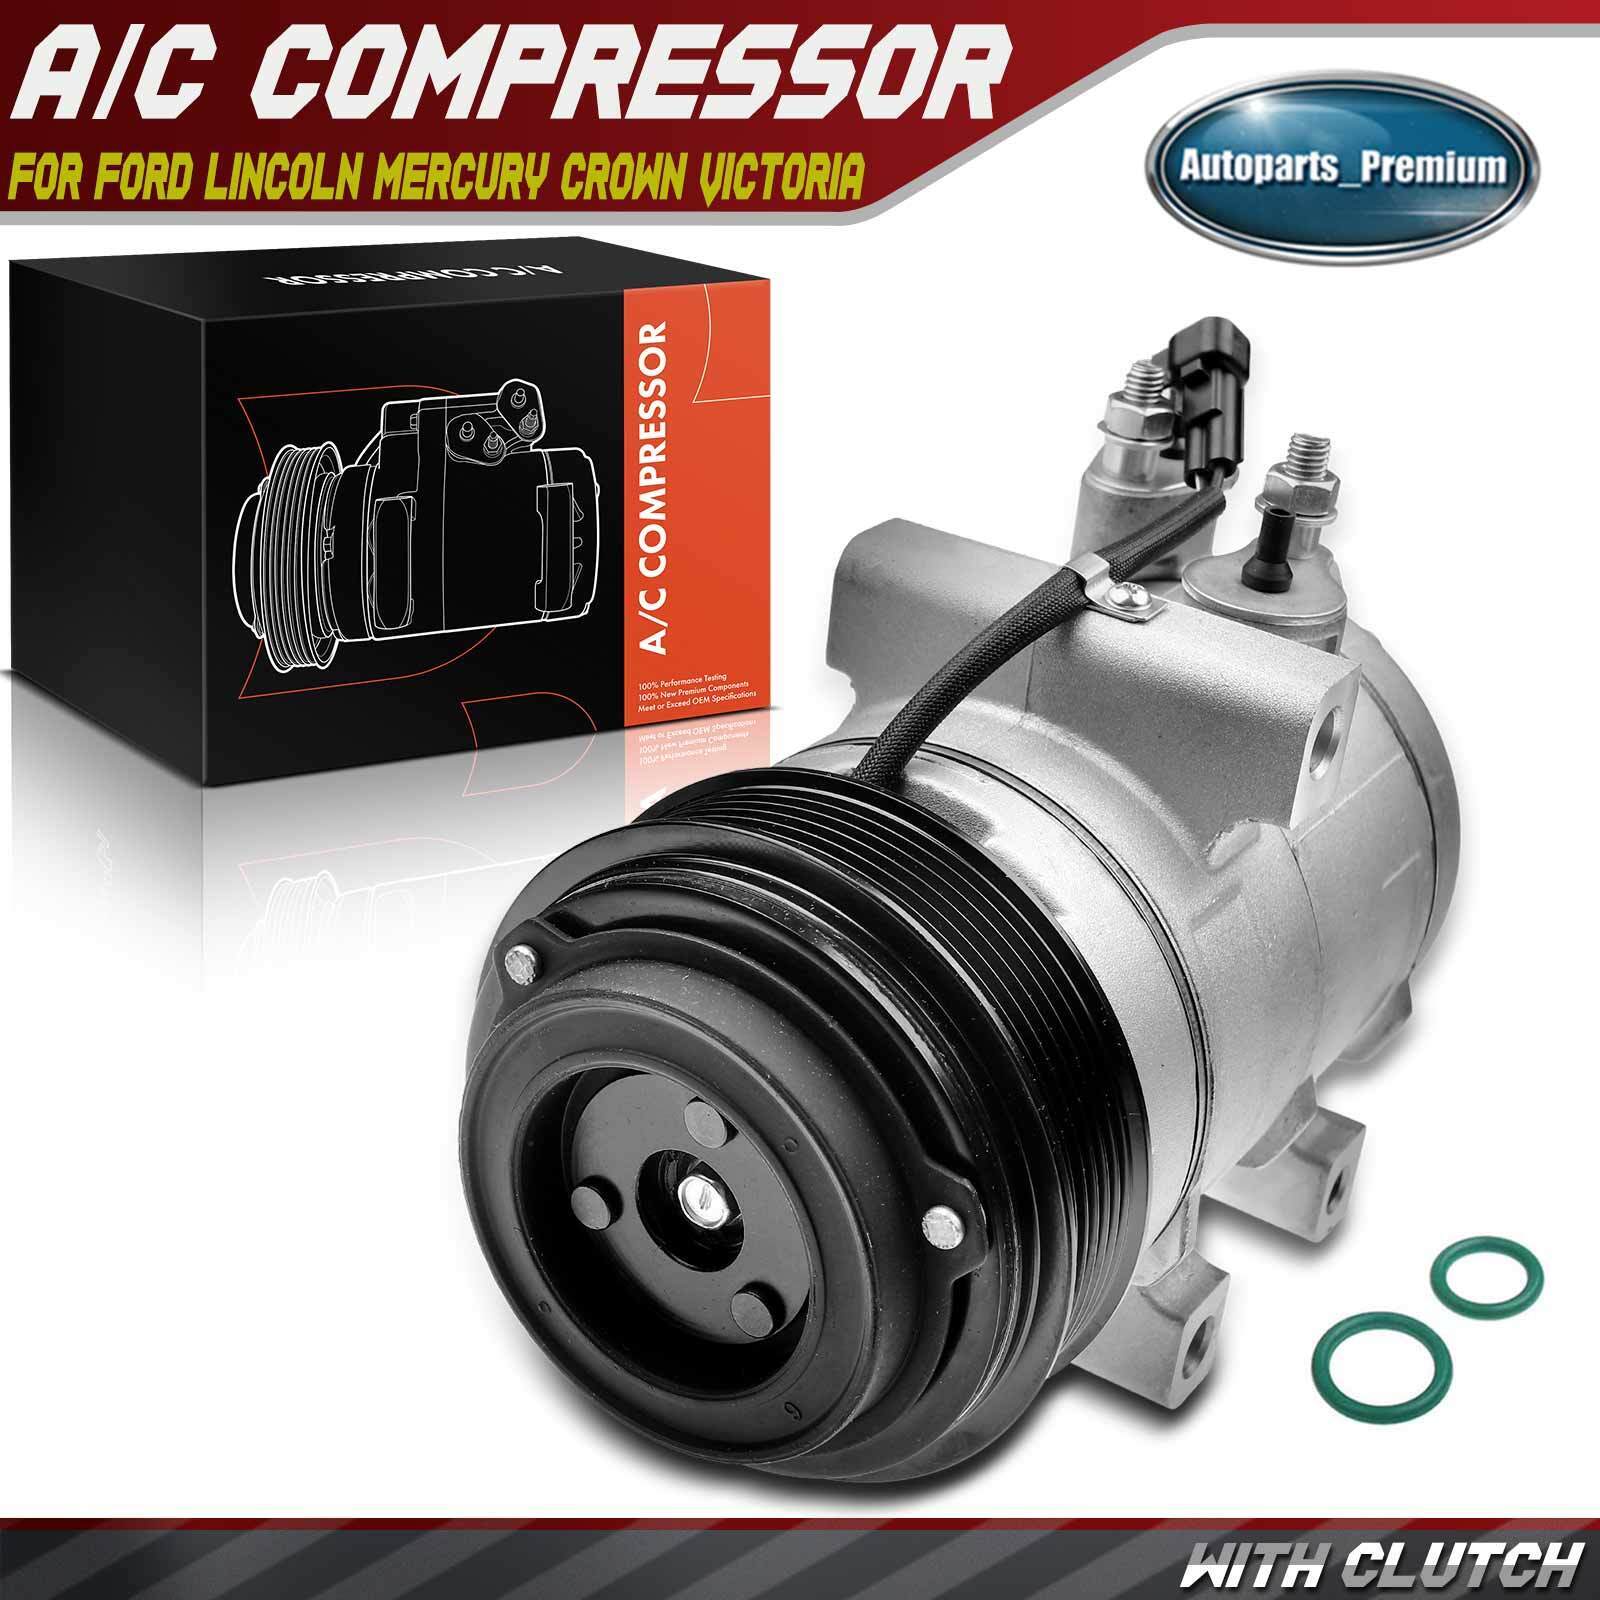 New AC Compressor with Clutch for Ford Lincoln Town Car Ford Explorer Mercury